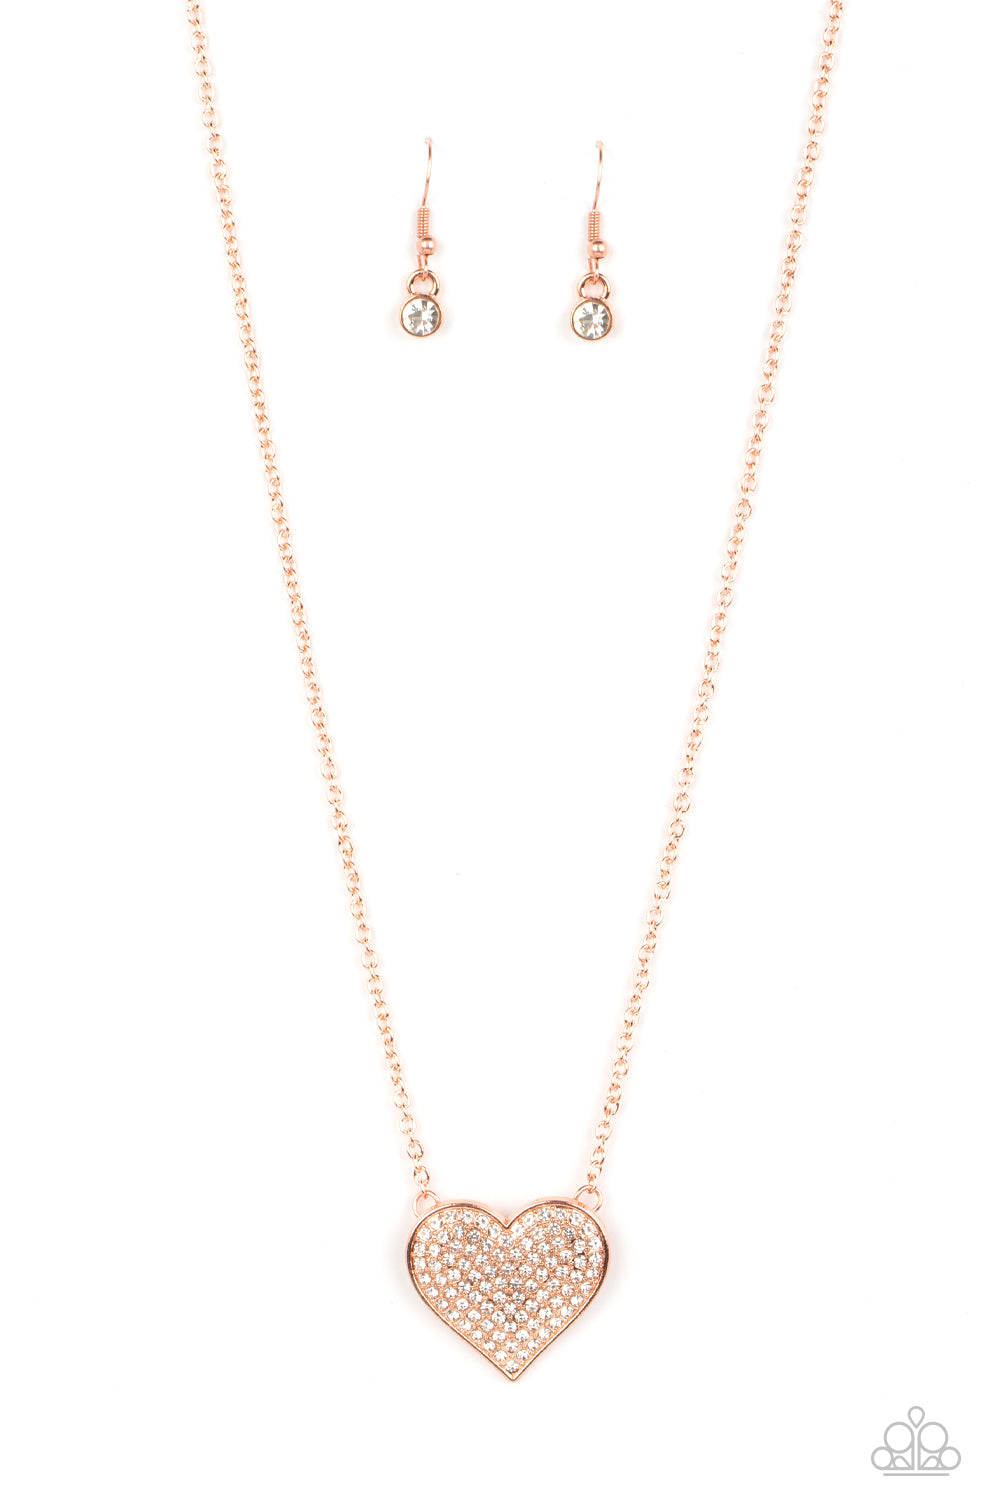 Paparazzi Accessories Spellbinding Sweetheart - Copper A heart-shaped pendant in a shiny copper finish is anchored between two strands of delicate chain in the same reflective finish. The interior of the heart is filled with glittery white rhinestones, in